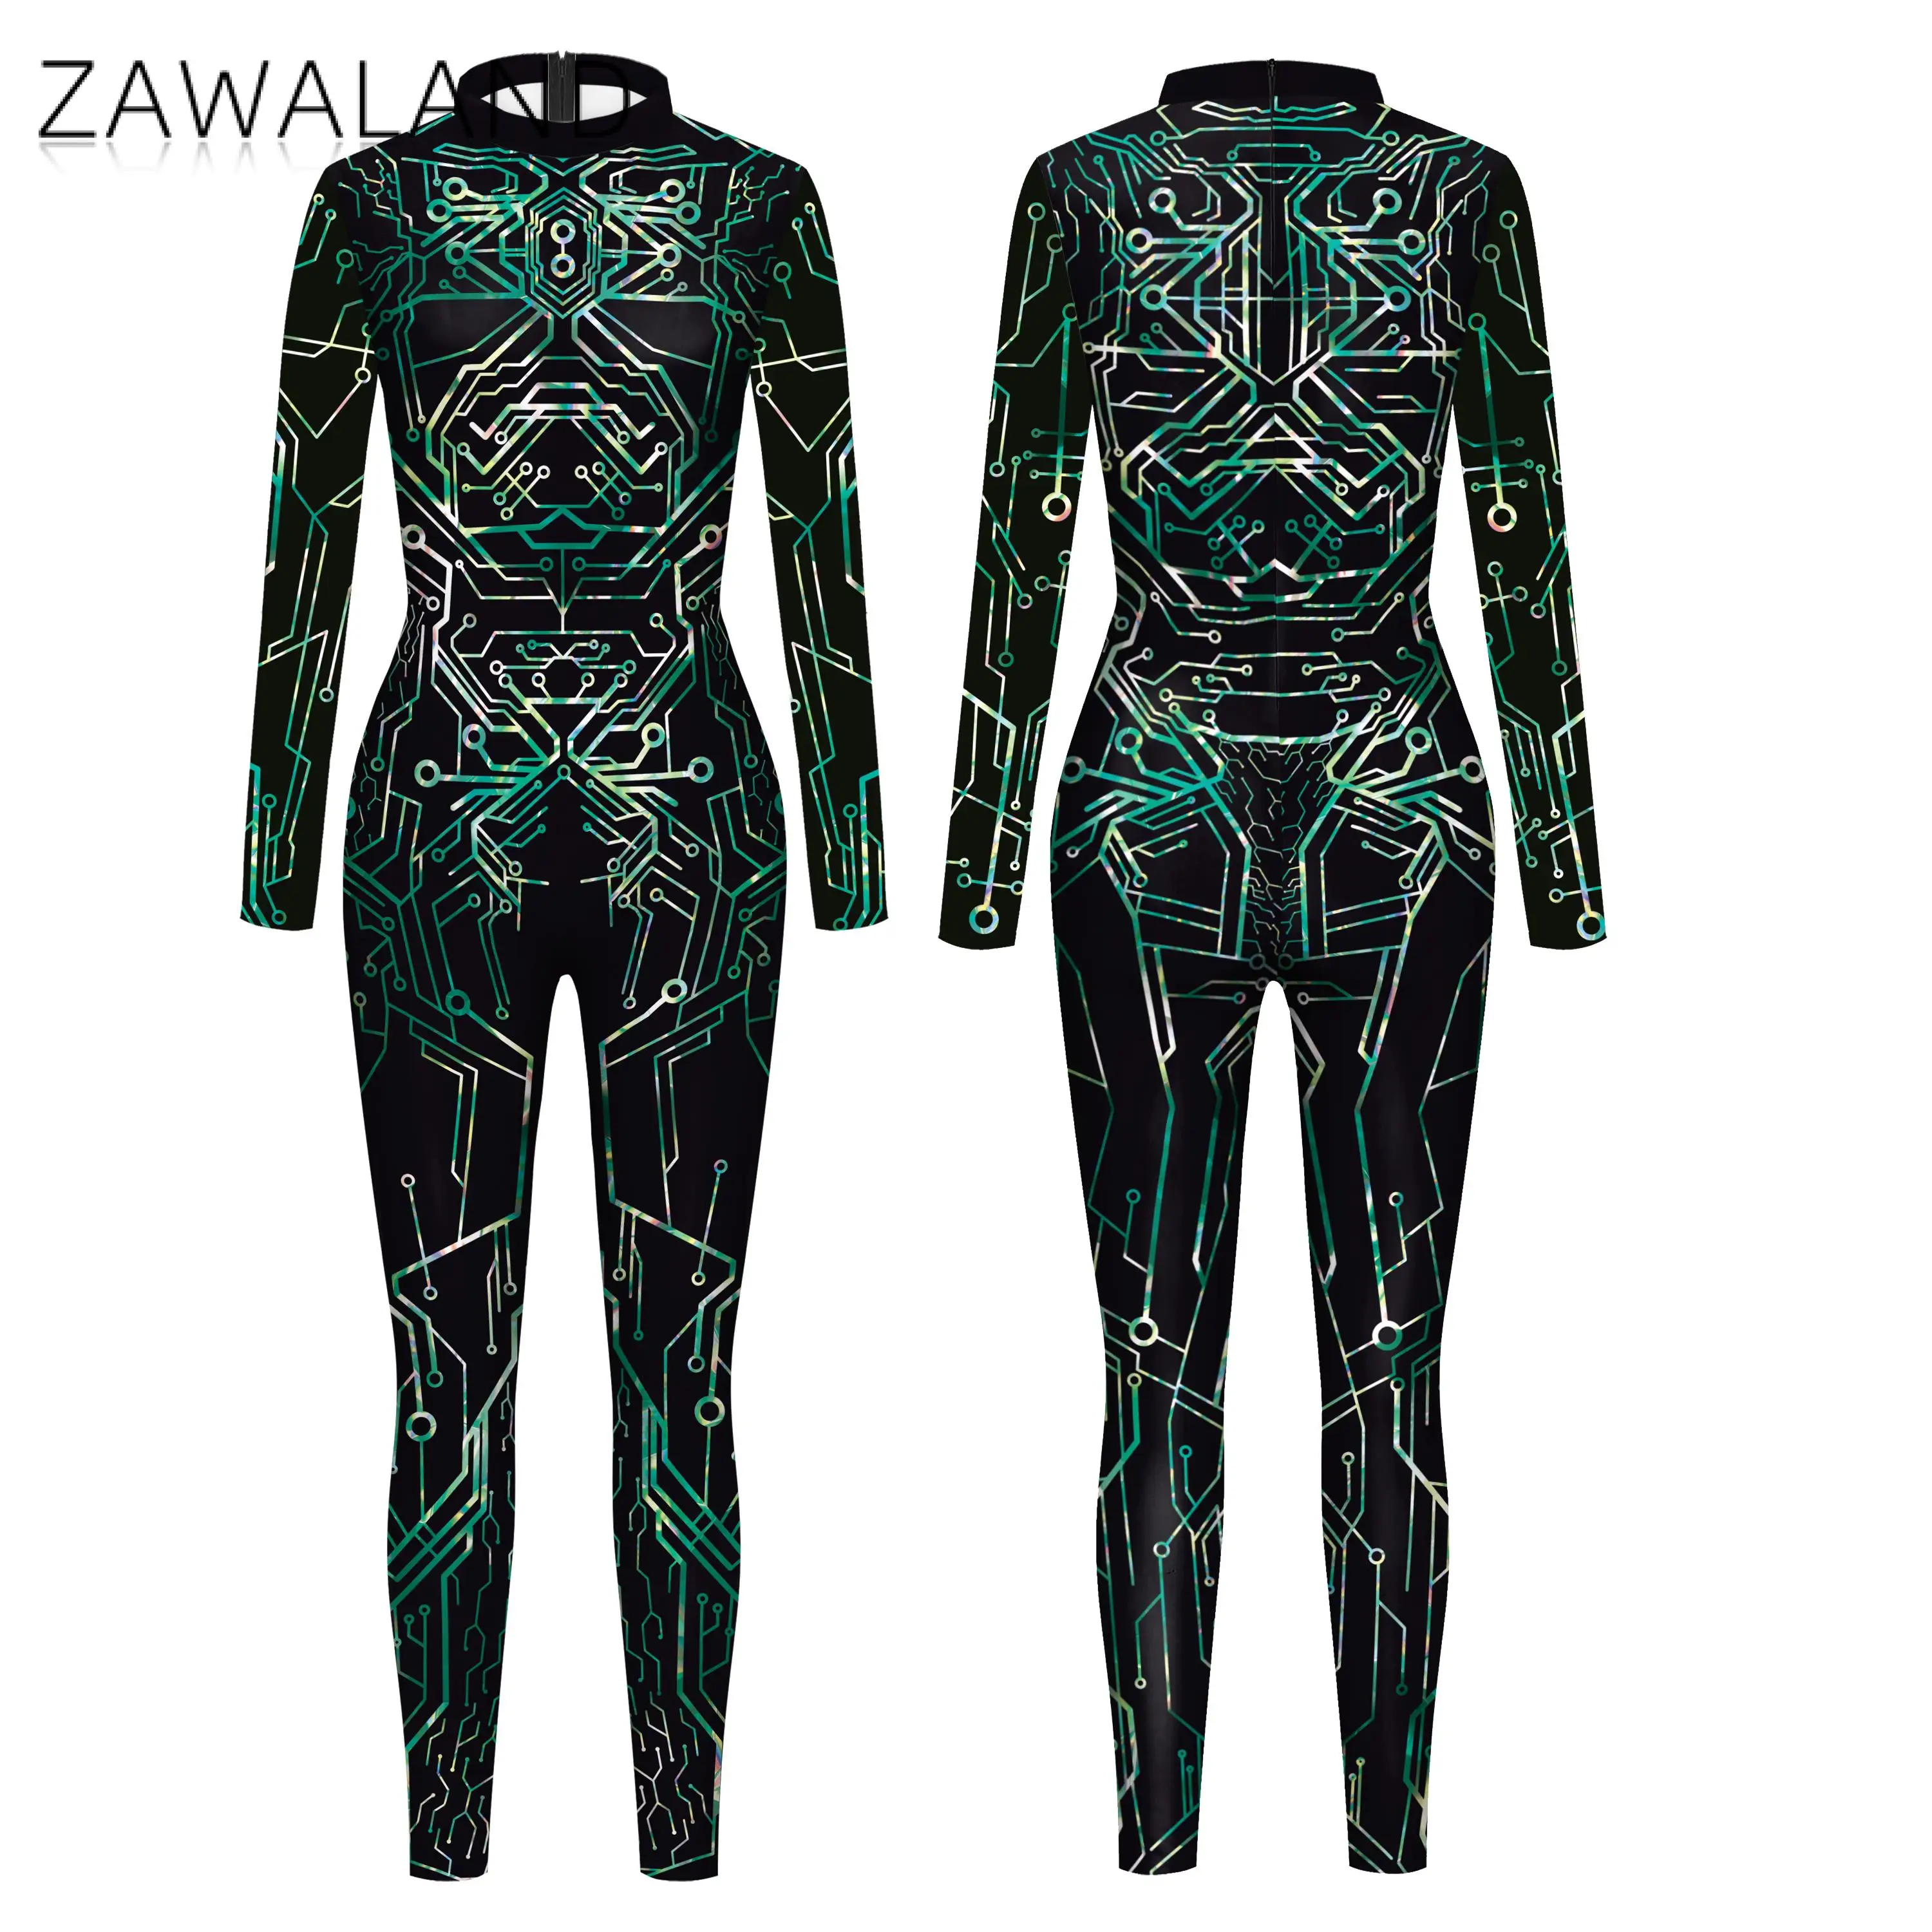 

Zawaland Halloween Party Carnival Performance Whole Costume Cosplay Ghost Skeleton 3D Printed Zentai Bodysuit Spandex Catsuit